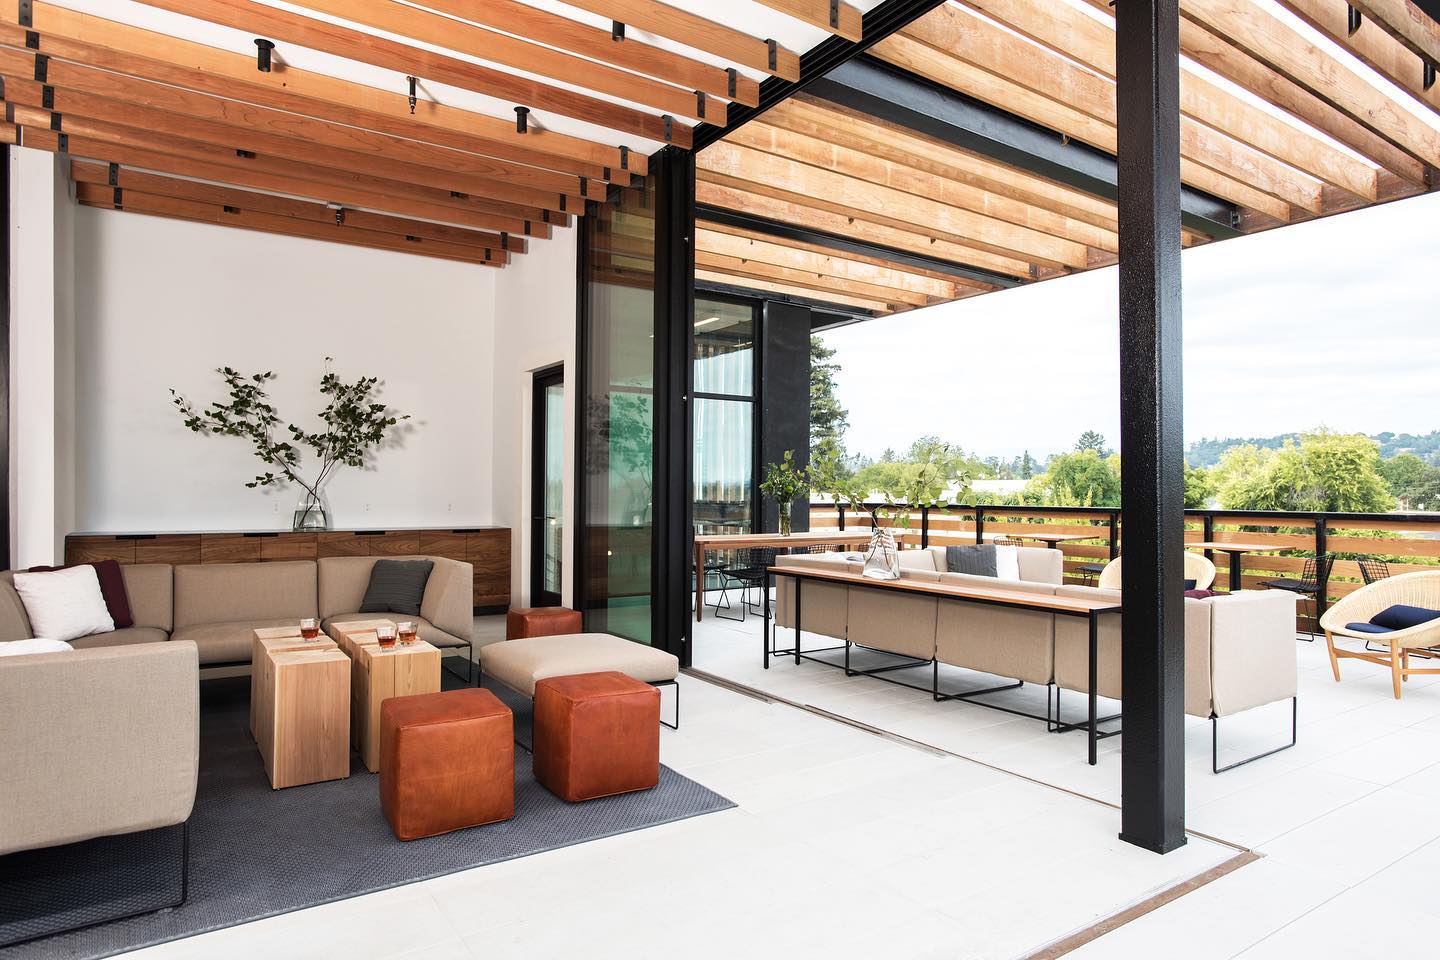 The Rooftop Bar at Harmon Guest House in Healdsburg. (Courtesy of Harmon Guest House)